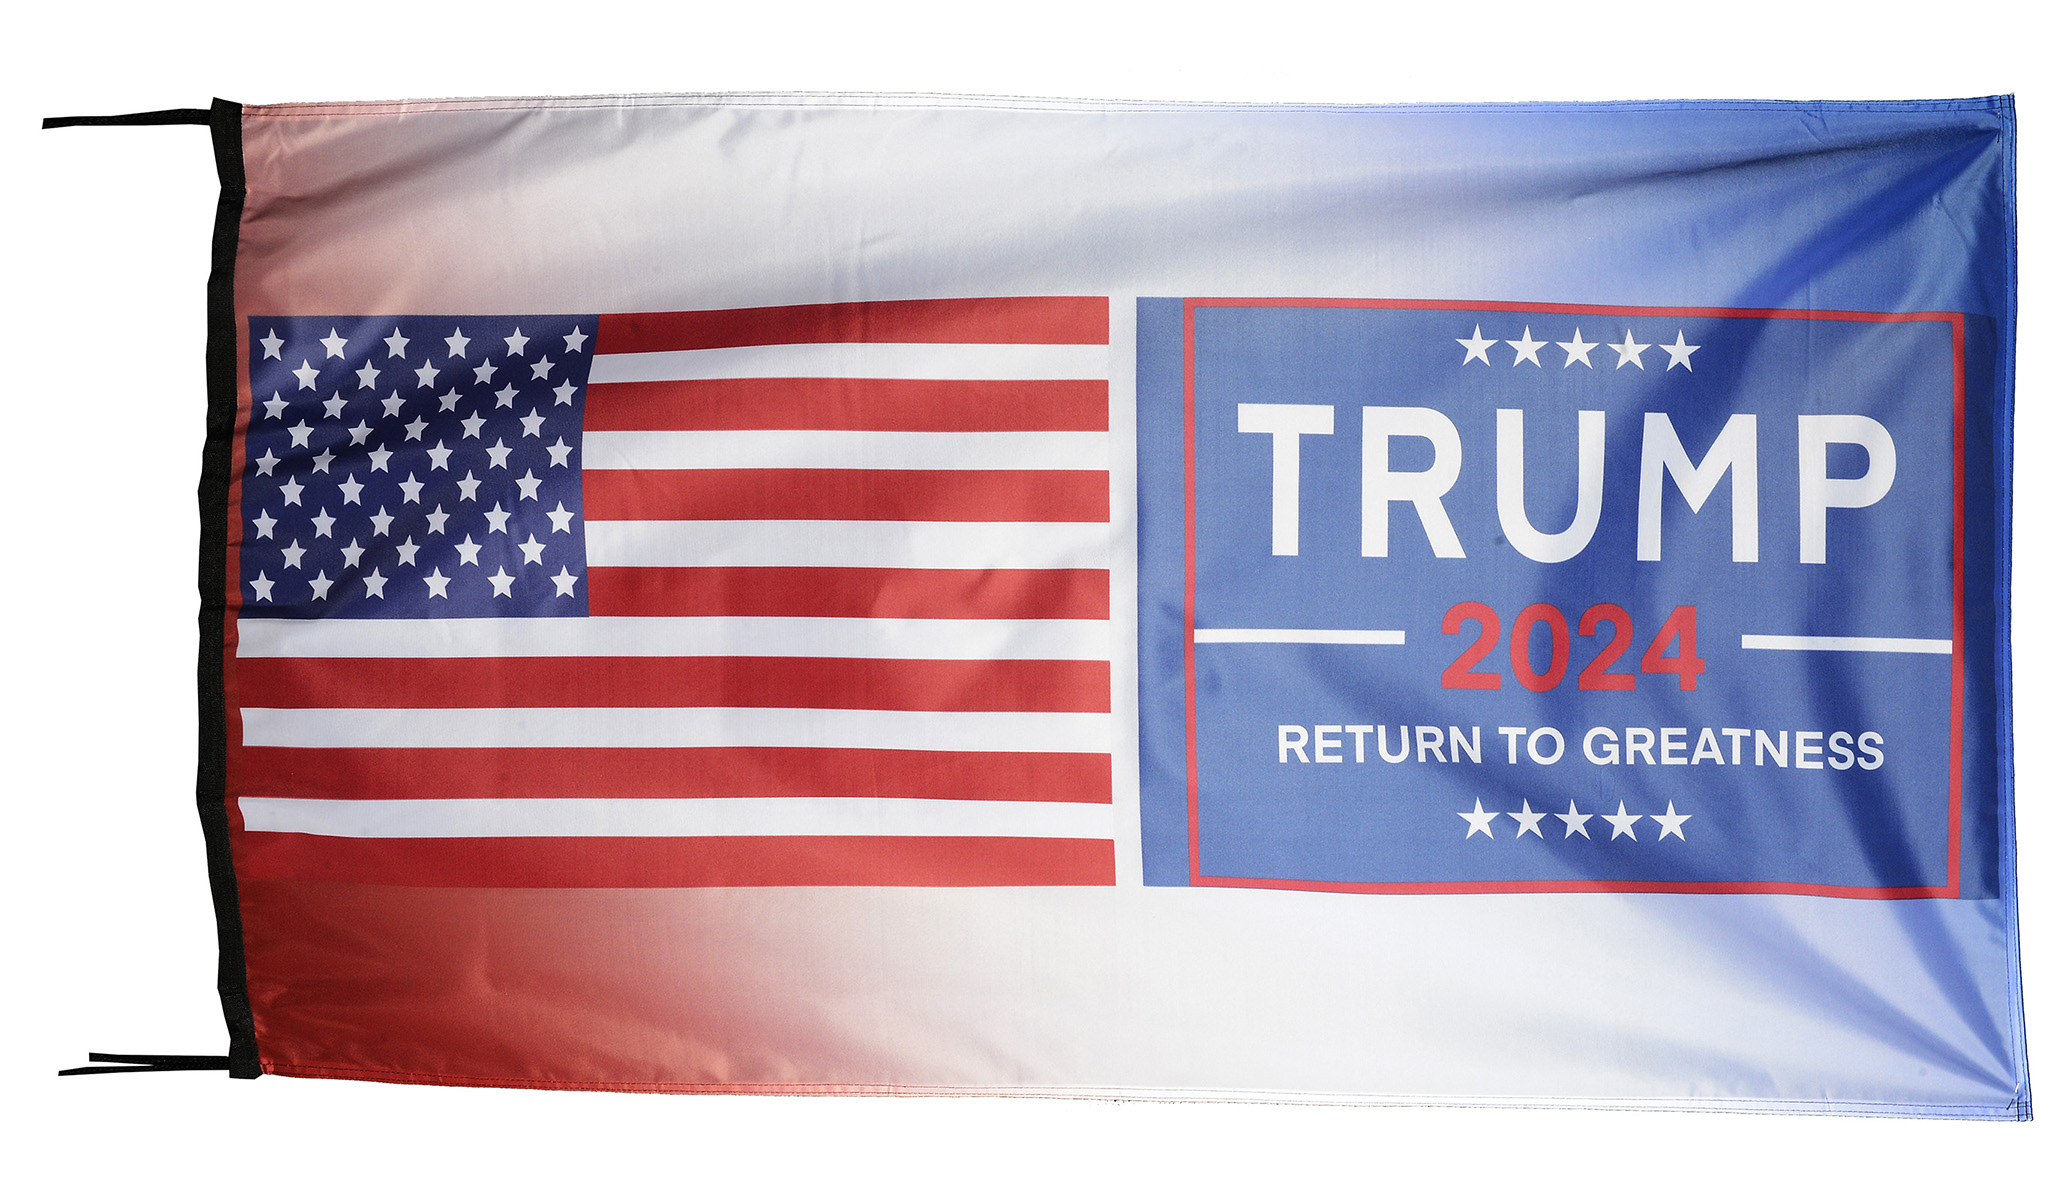 Flag  077 USA / US Country / United States Of America and Republicans Party / Senators / Congress / Washington / White House / Capitol / Politics / Presidential / Elections / Washington / Pride Hybrid Weather-Resistant Polyester Outdoor Flag Landscape Banner / Vivid Colors / 3 X 5 FT (150 x 90cm) International Flags for Sale